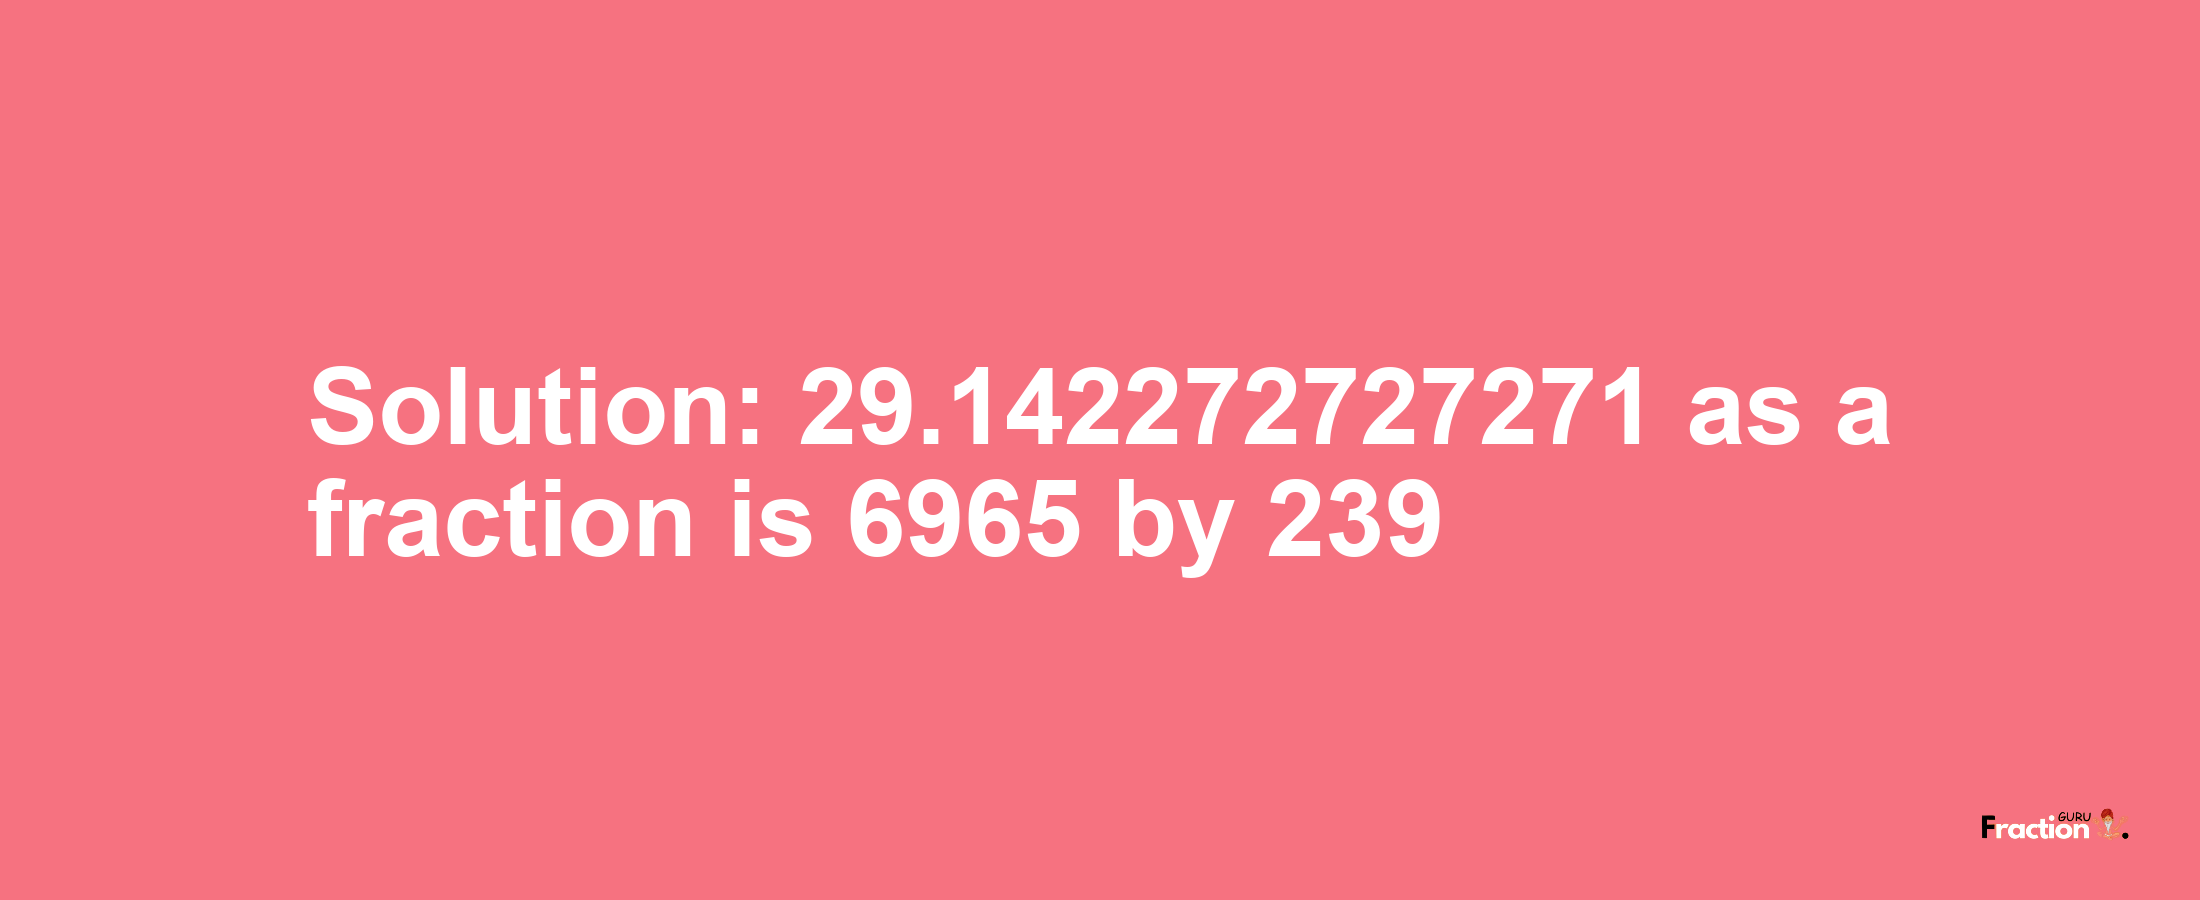 Solution:29.142272727271 as a fraction is 6965/239